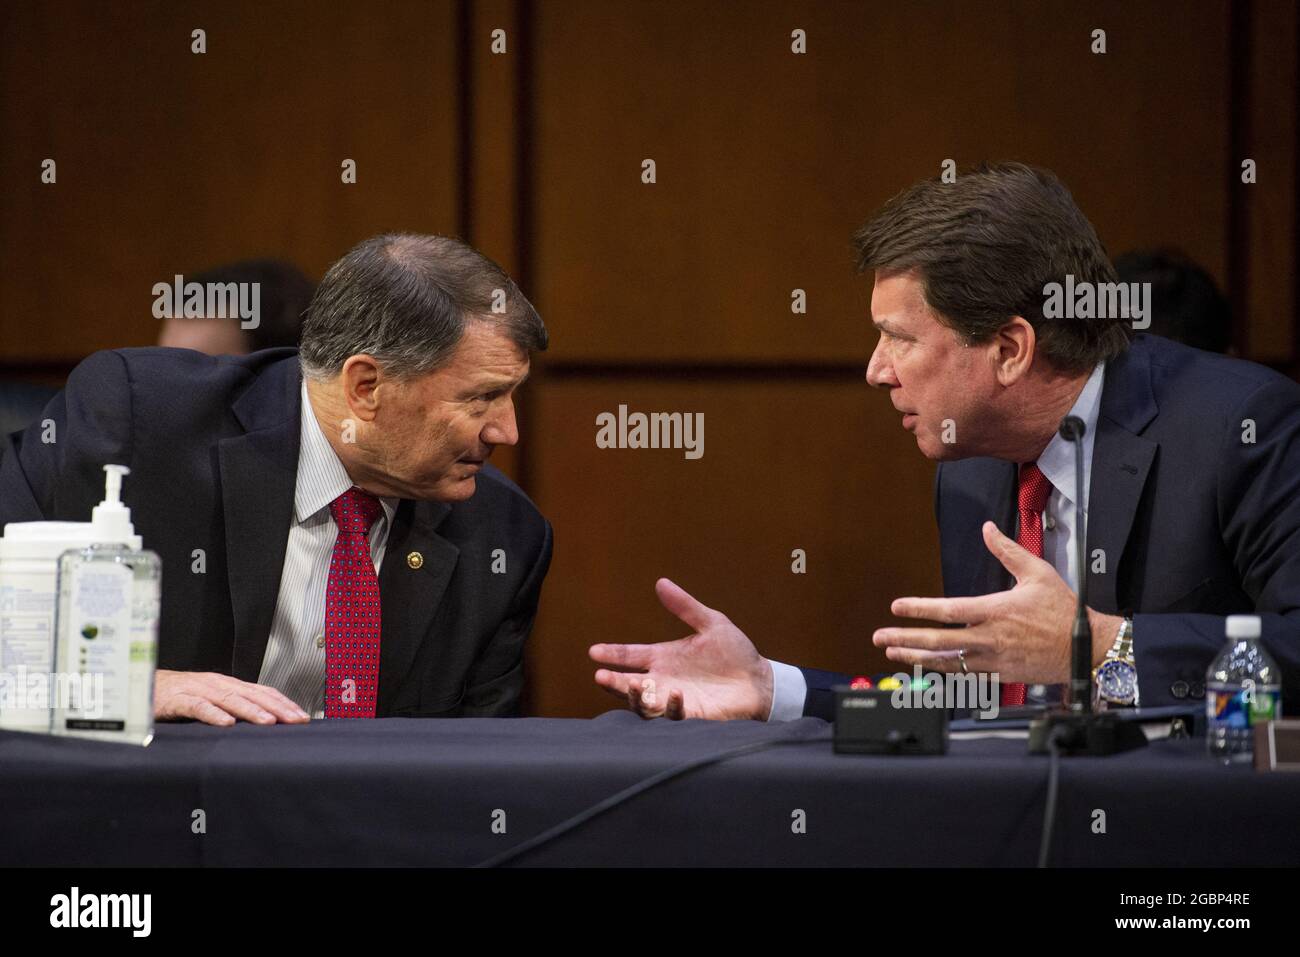 United States Senator Mike Rounds (Republican of South Dakota), left, confers with United States Senator Bill Hagerty (Republican of Tennessee), right, during a Senate Committee on Foreign Relations business meeting for nominations and legislative considerations in the Hart Senate Office Building in Washington, DC, USA, Wednesday, August 4, 2021. Photo by Rod Lamkey/CNP/ABACAPRESS.COM Stock Photo